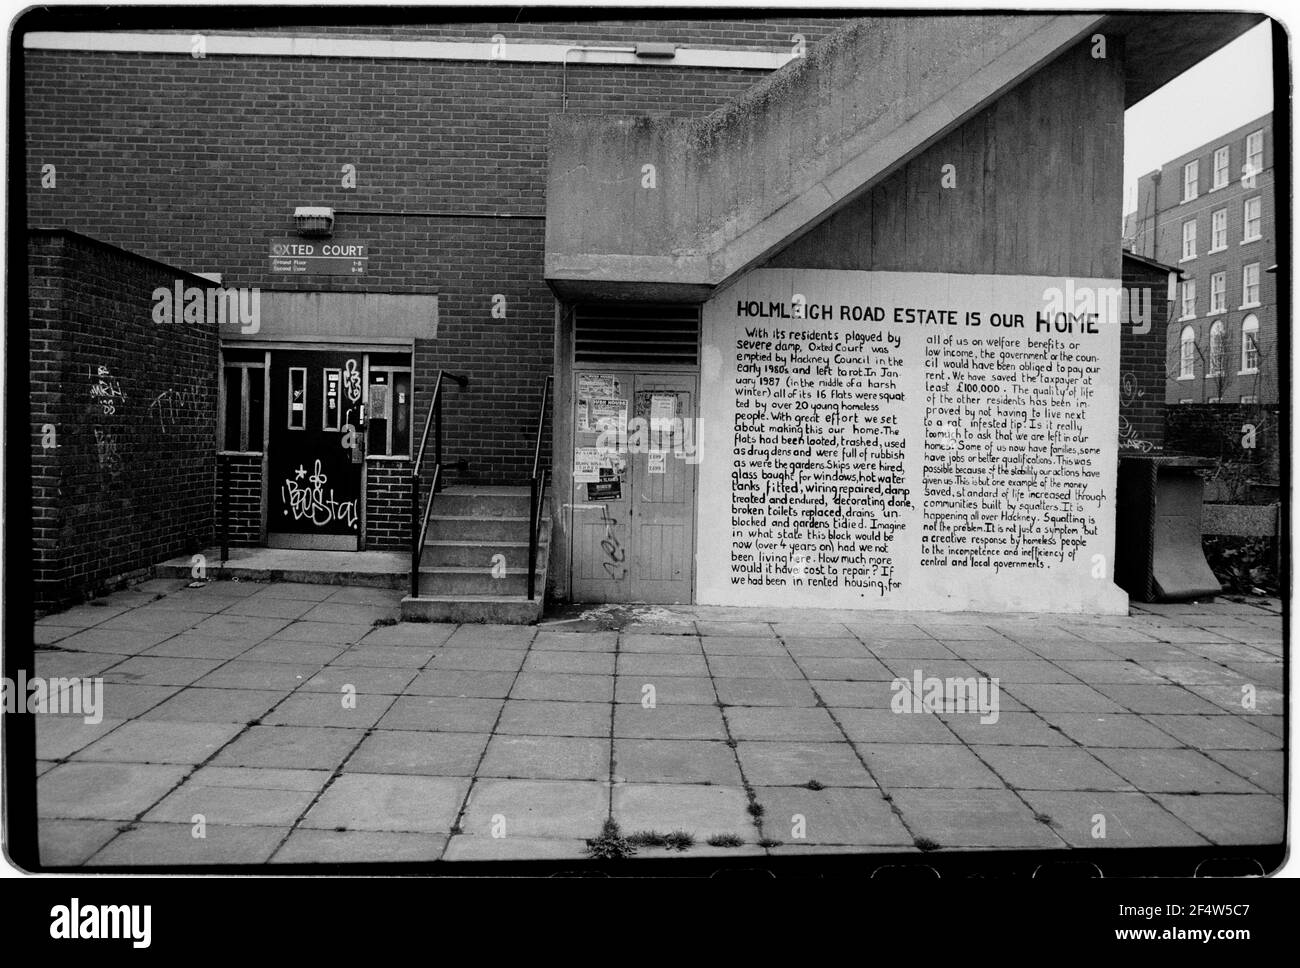 London England. Squatters evicted from Oxted Court on the Holmleigh Estate in Hackney East London. 26 April 1991. Hackney Council used legislation using section 7 of the 1977 Criminal Law Act allowing them to forcibly evict squatters from properties many had occupied for more than three years saying that new tenants were to take over the once derelict properties that the squatters had ‘done up’ and made habitable. At dawn Police and Council workers with tools to cut bolts arrived to evict 19 famalies from their homes. Stock Photo